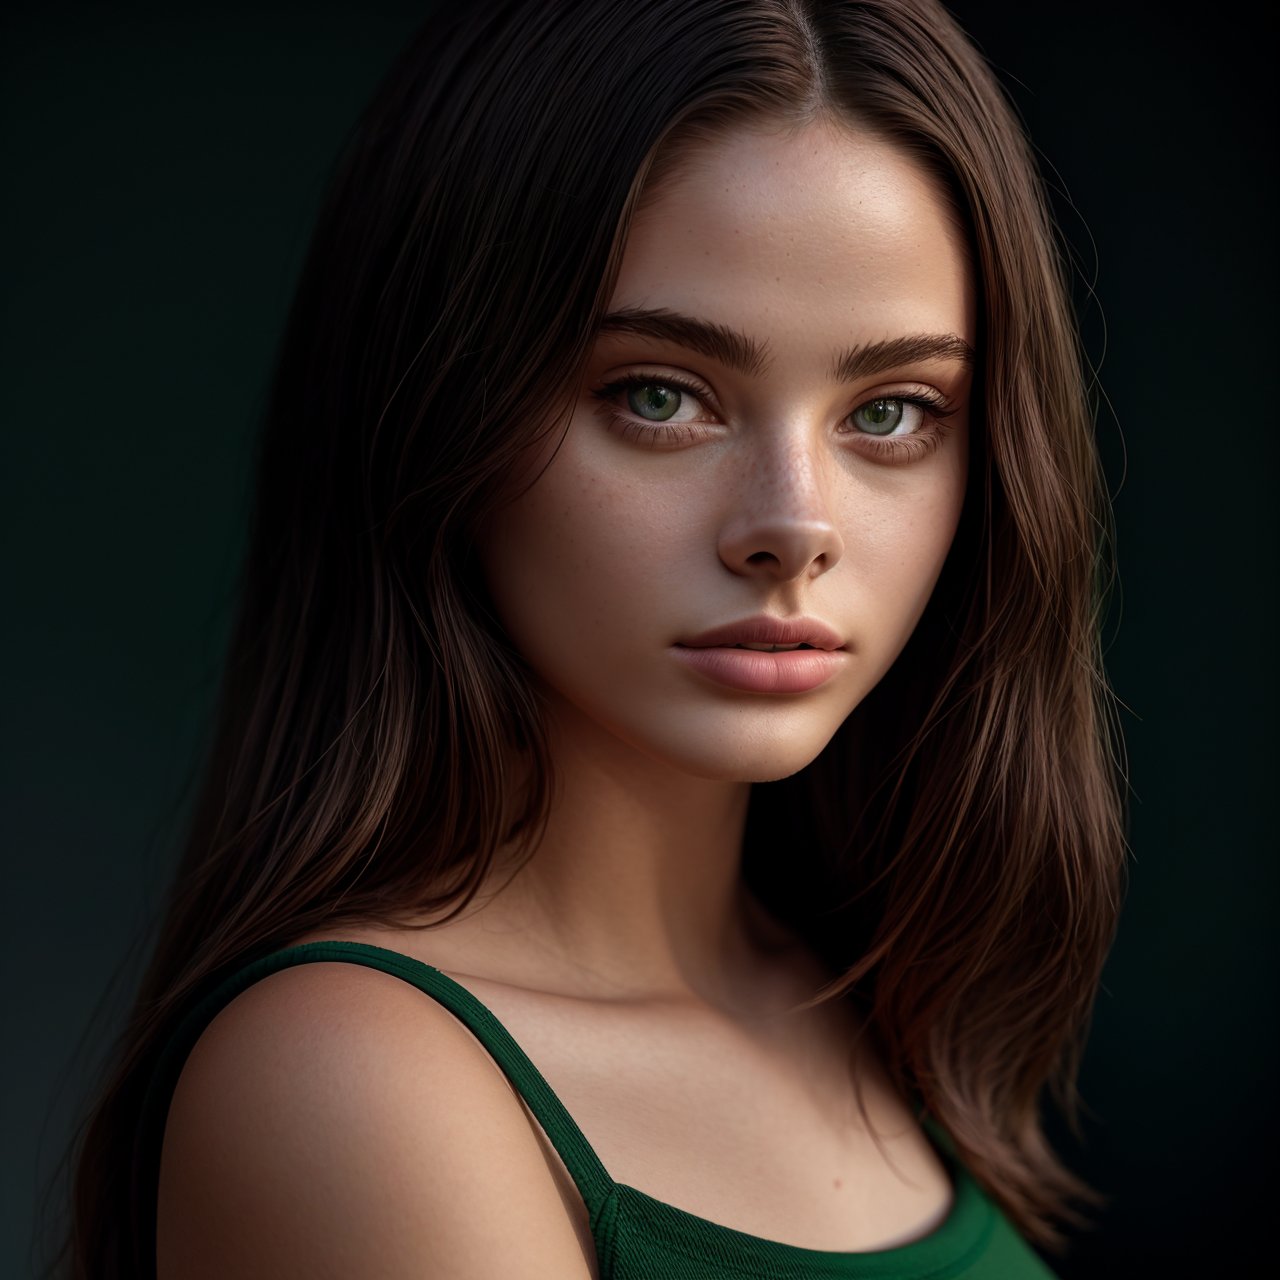 (masterpiece:1.3), HD quality, HD, HQ, 4K distant short, full body portrait of charming (AIDA_LoRA_MeW2023:1.08) <lora:AIDA_LoRA_MeW2023:0.83> in (simple green shirt:1.1), [stunning woman], pretty face, parted lips, cinematic, composition, kkw-ph1, (colorful:1.1), (studio photo:1.1), (simple black background:1.1)